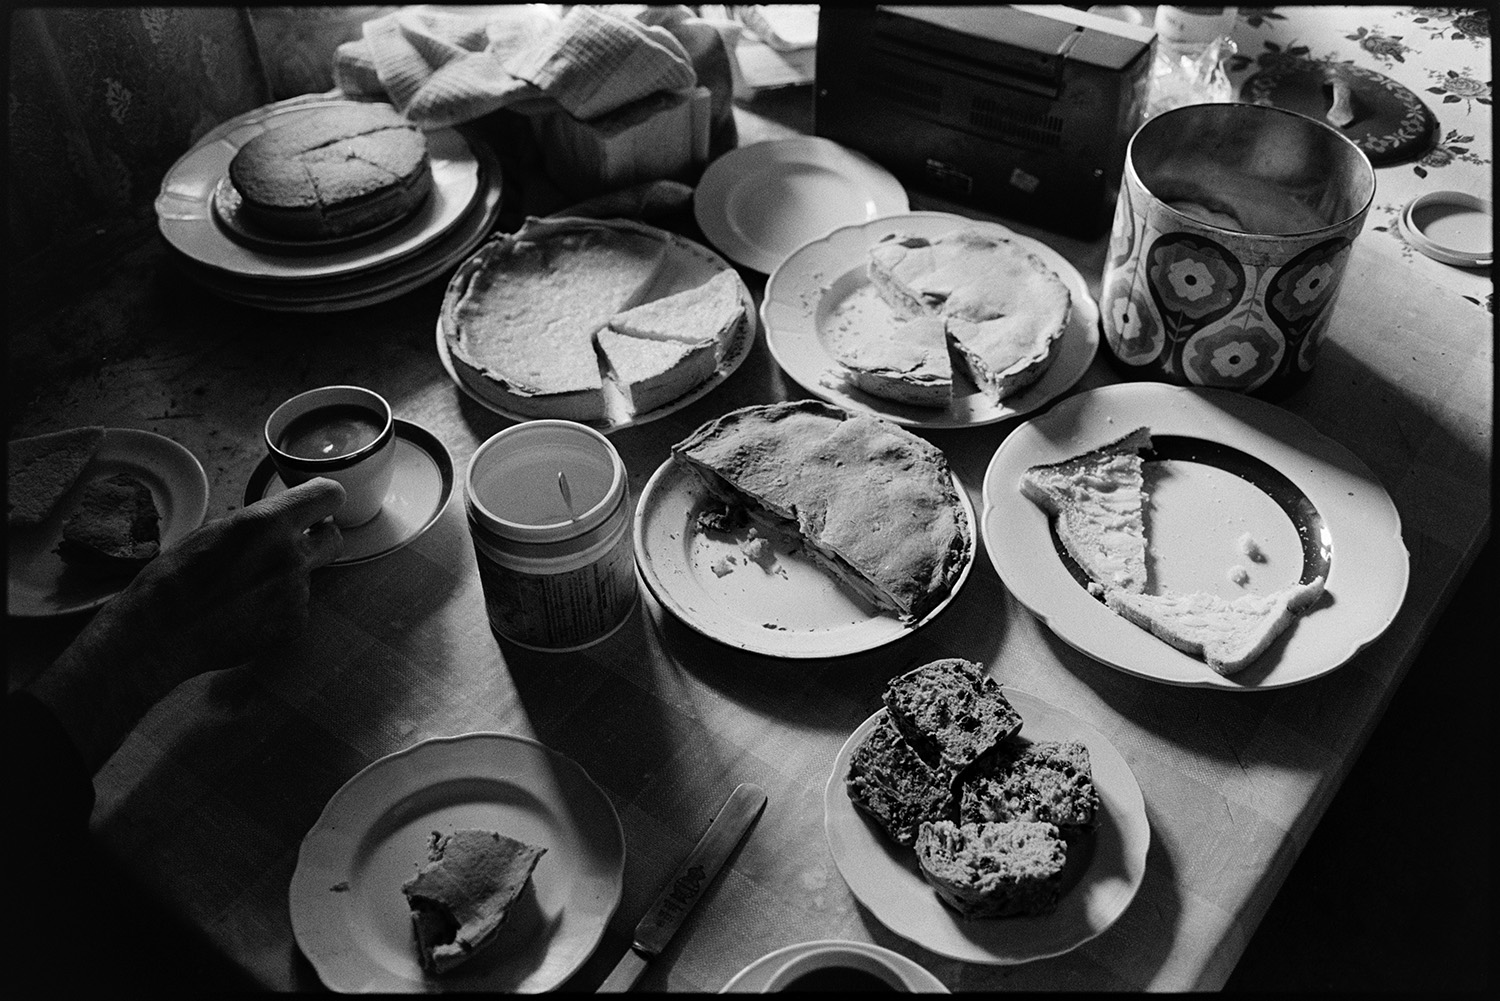 Food and drink laid out on table in farmhouse. Pies and cake.
[Wilfie Spiers' kitchen table spread with bread and butter, cakes, pies and biscuits at Mount Pleasant, Beamsworthy.]